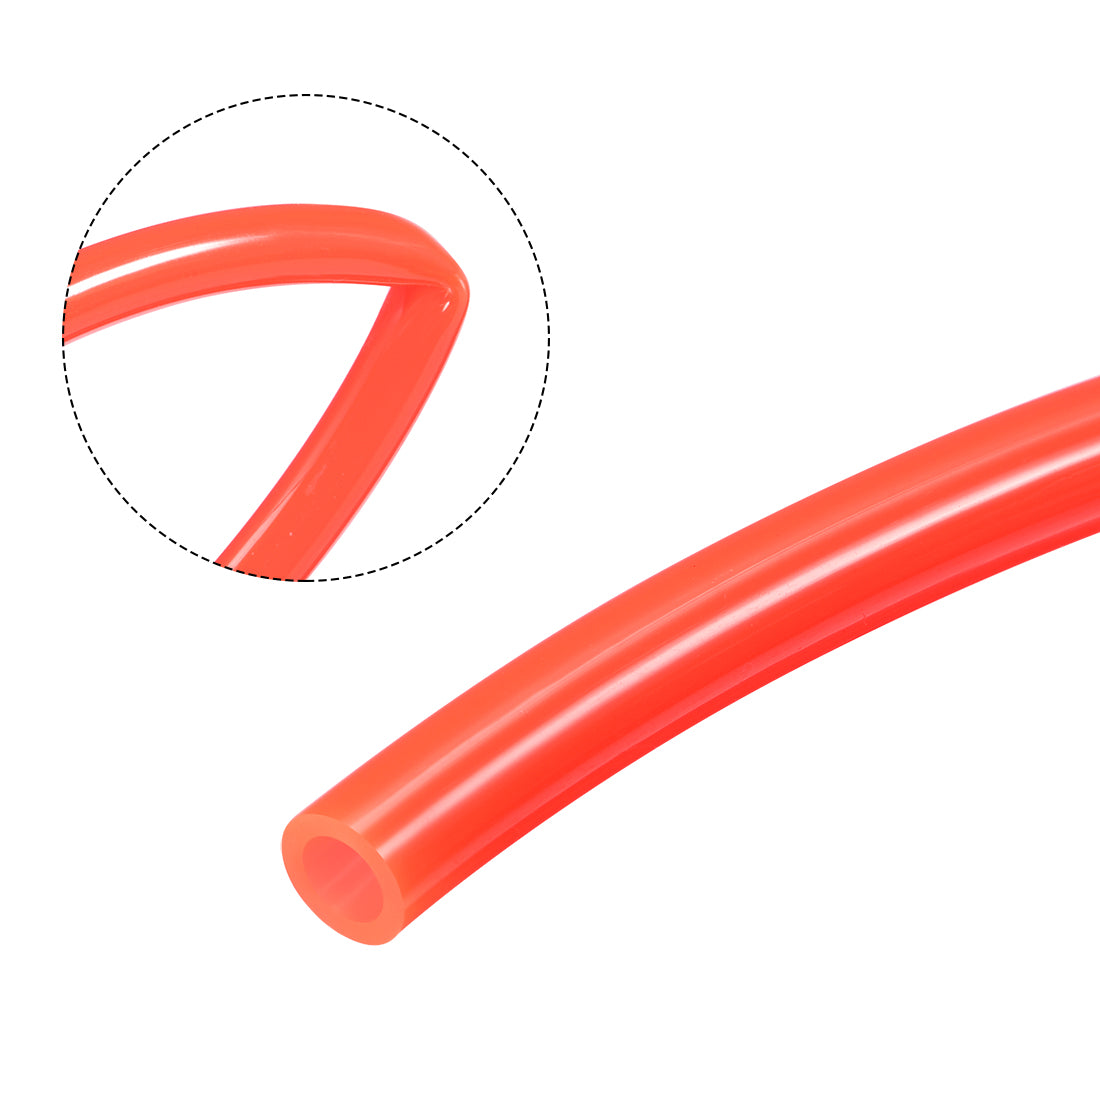 uxcell Uxcell Pneumatic Hose Tubing,6mm OD 4mm ID,Polyurethane PU Air Hose Pipe Tube,2 Meter 6.56ft,Red